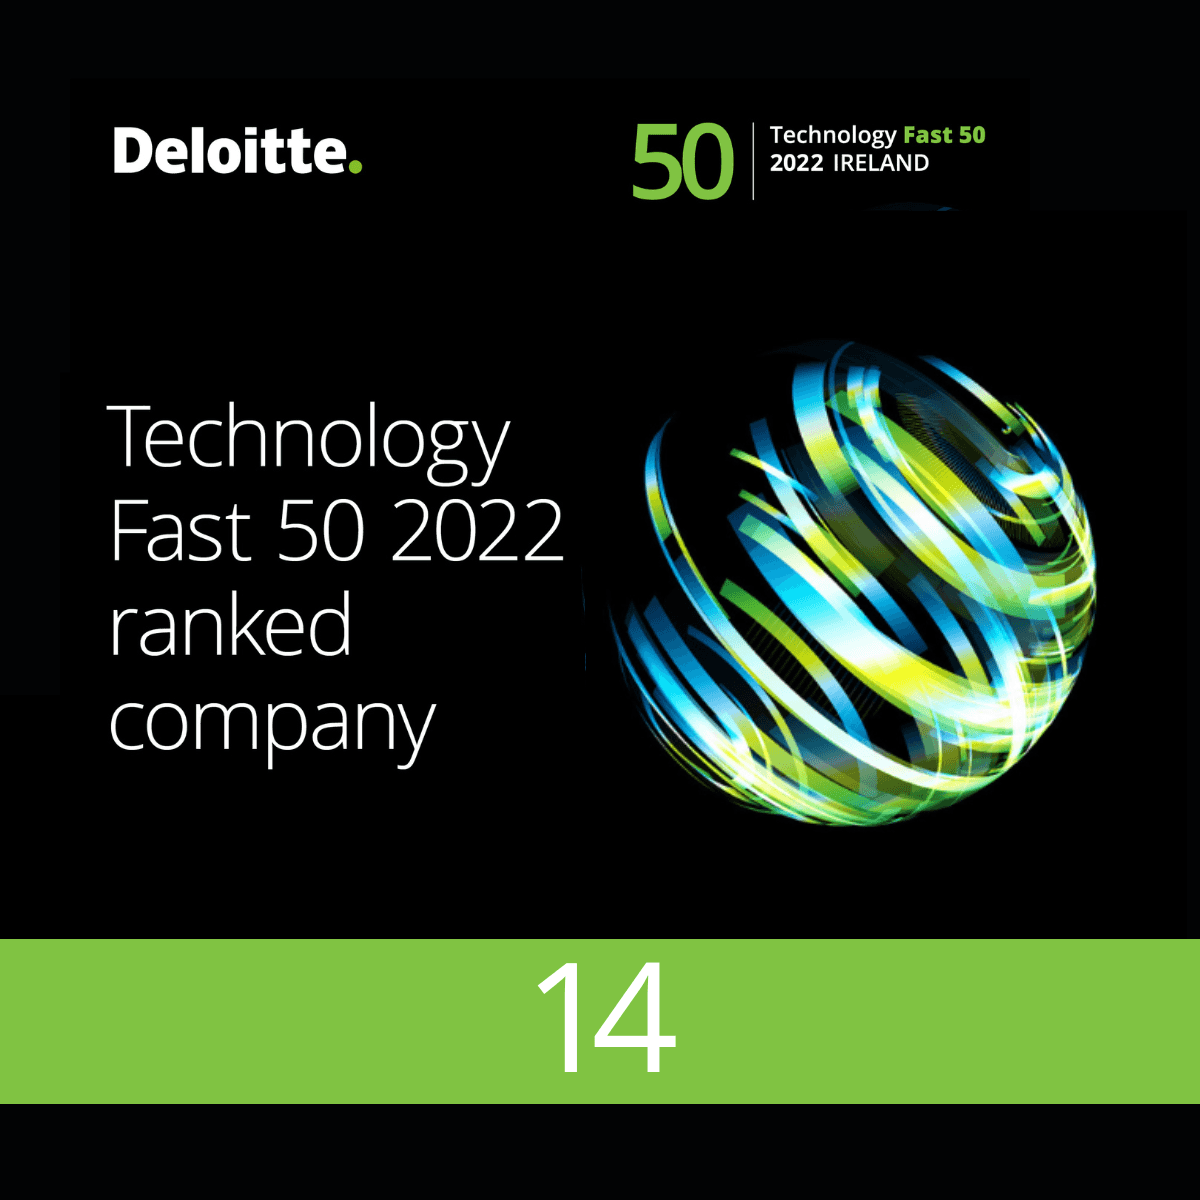 SciLeads ranked 14 in the Deloitte Technology Fast 50 Awards 2022